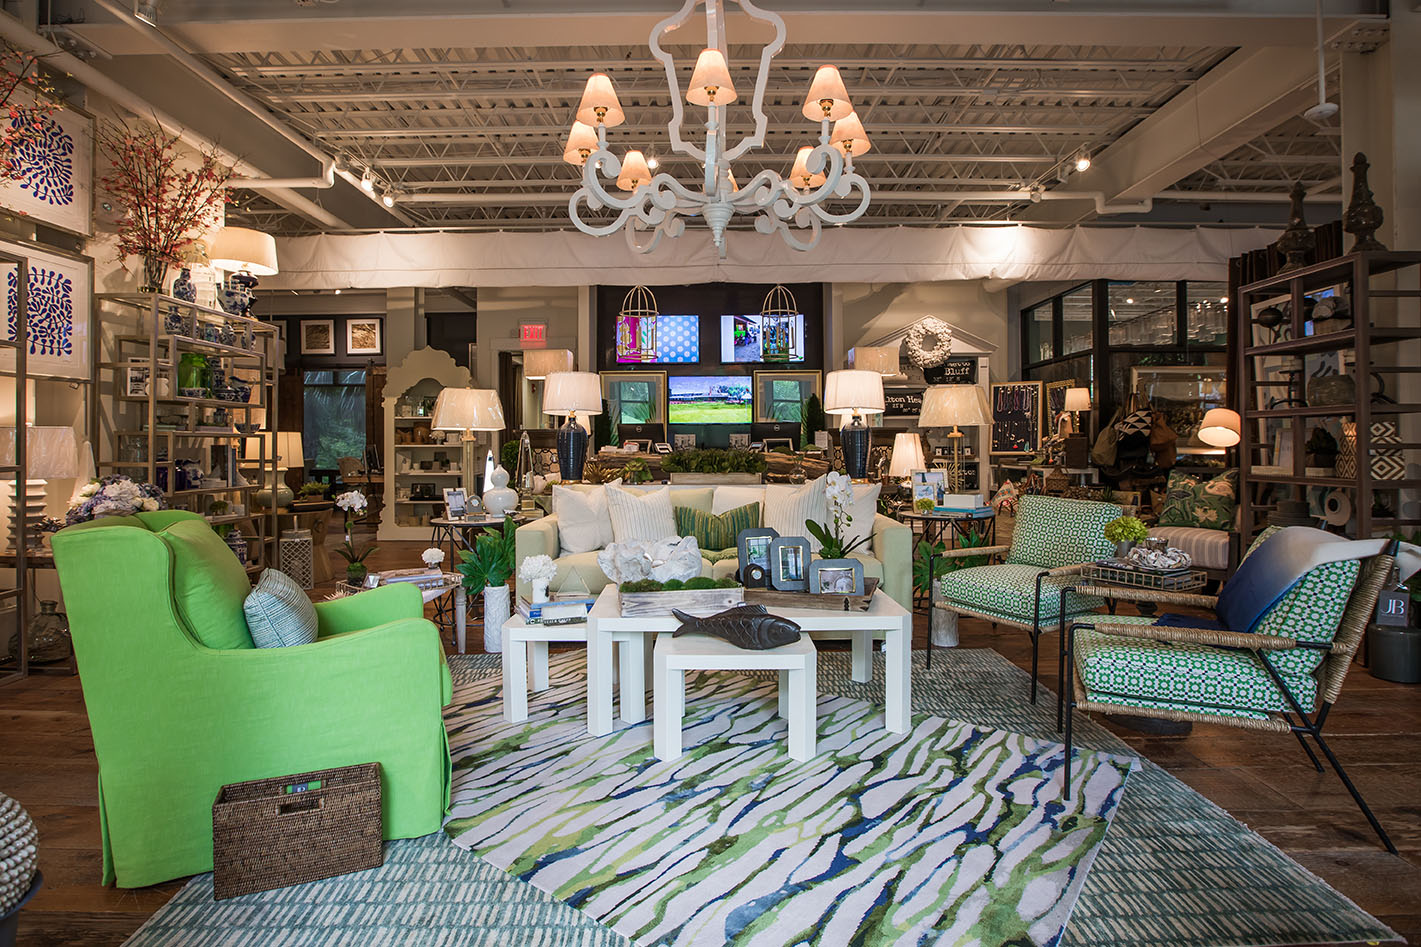 j banks design group's hilton head designer warehouse filled with colorful decor items and ocean-inspired gifts